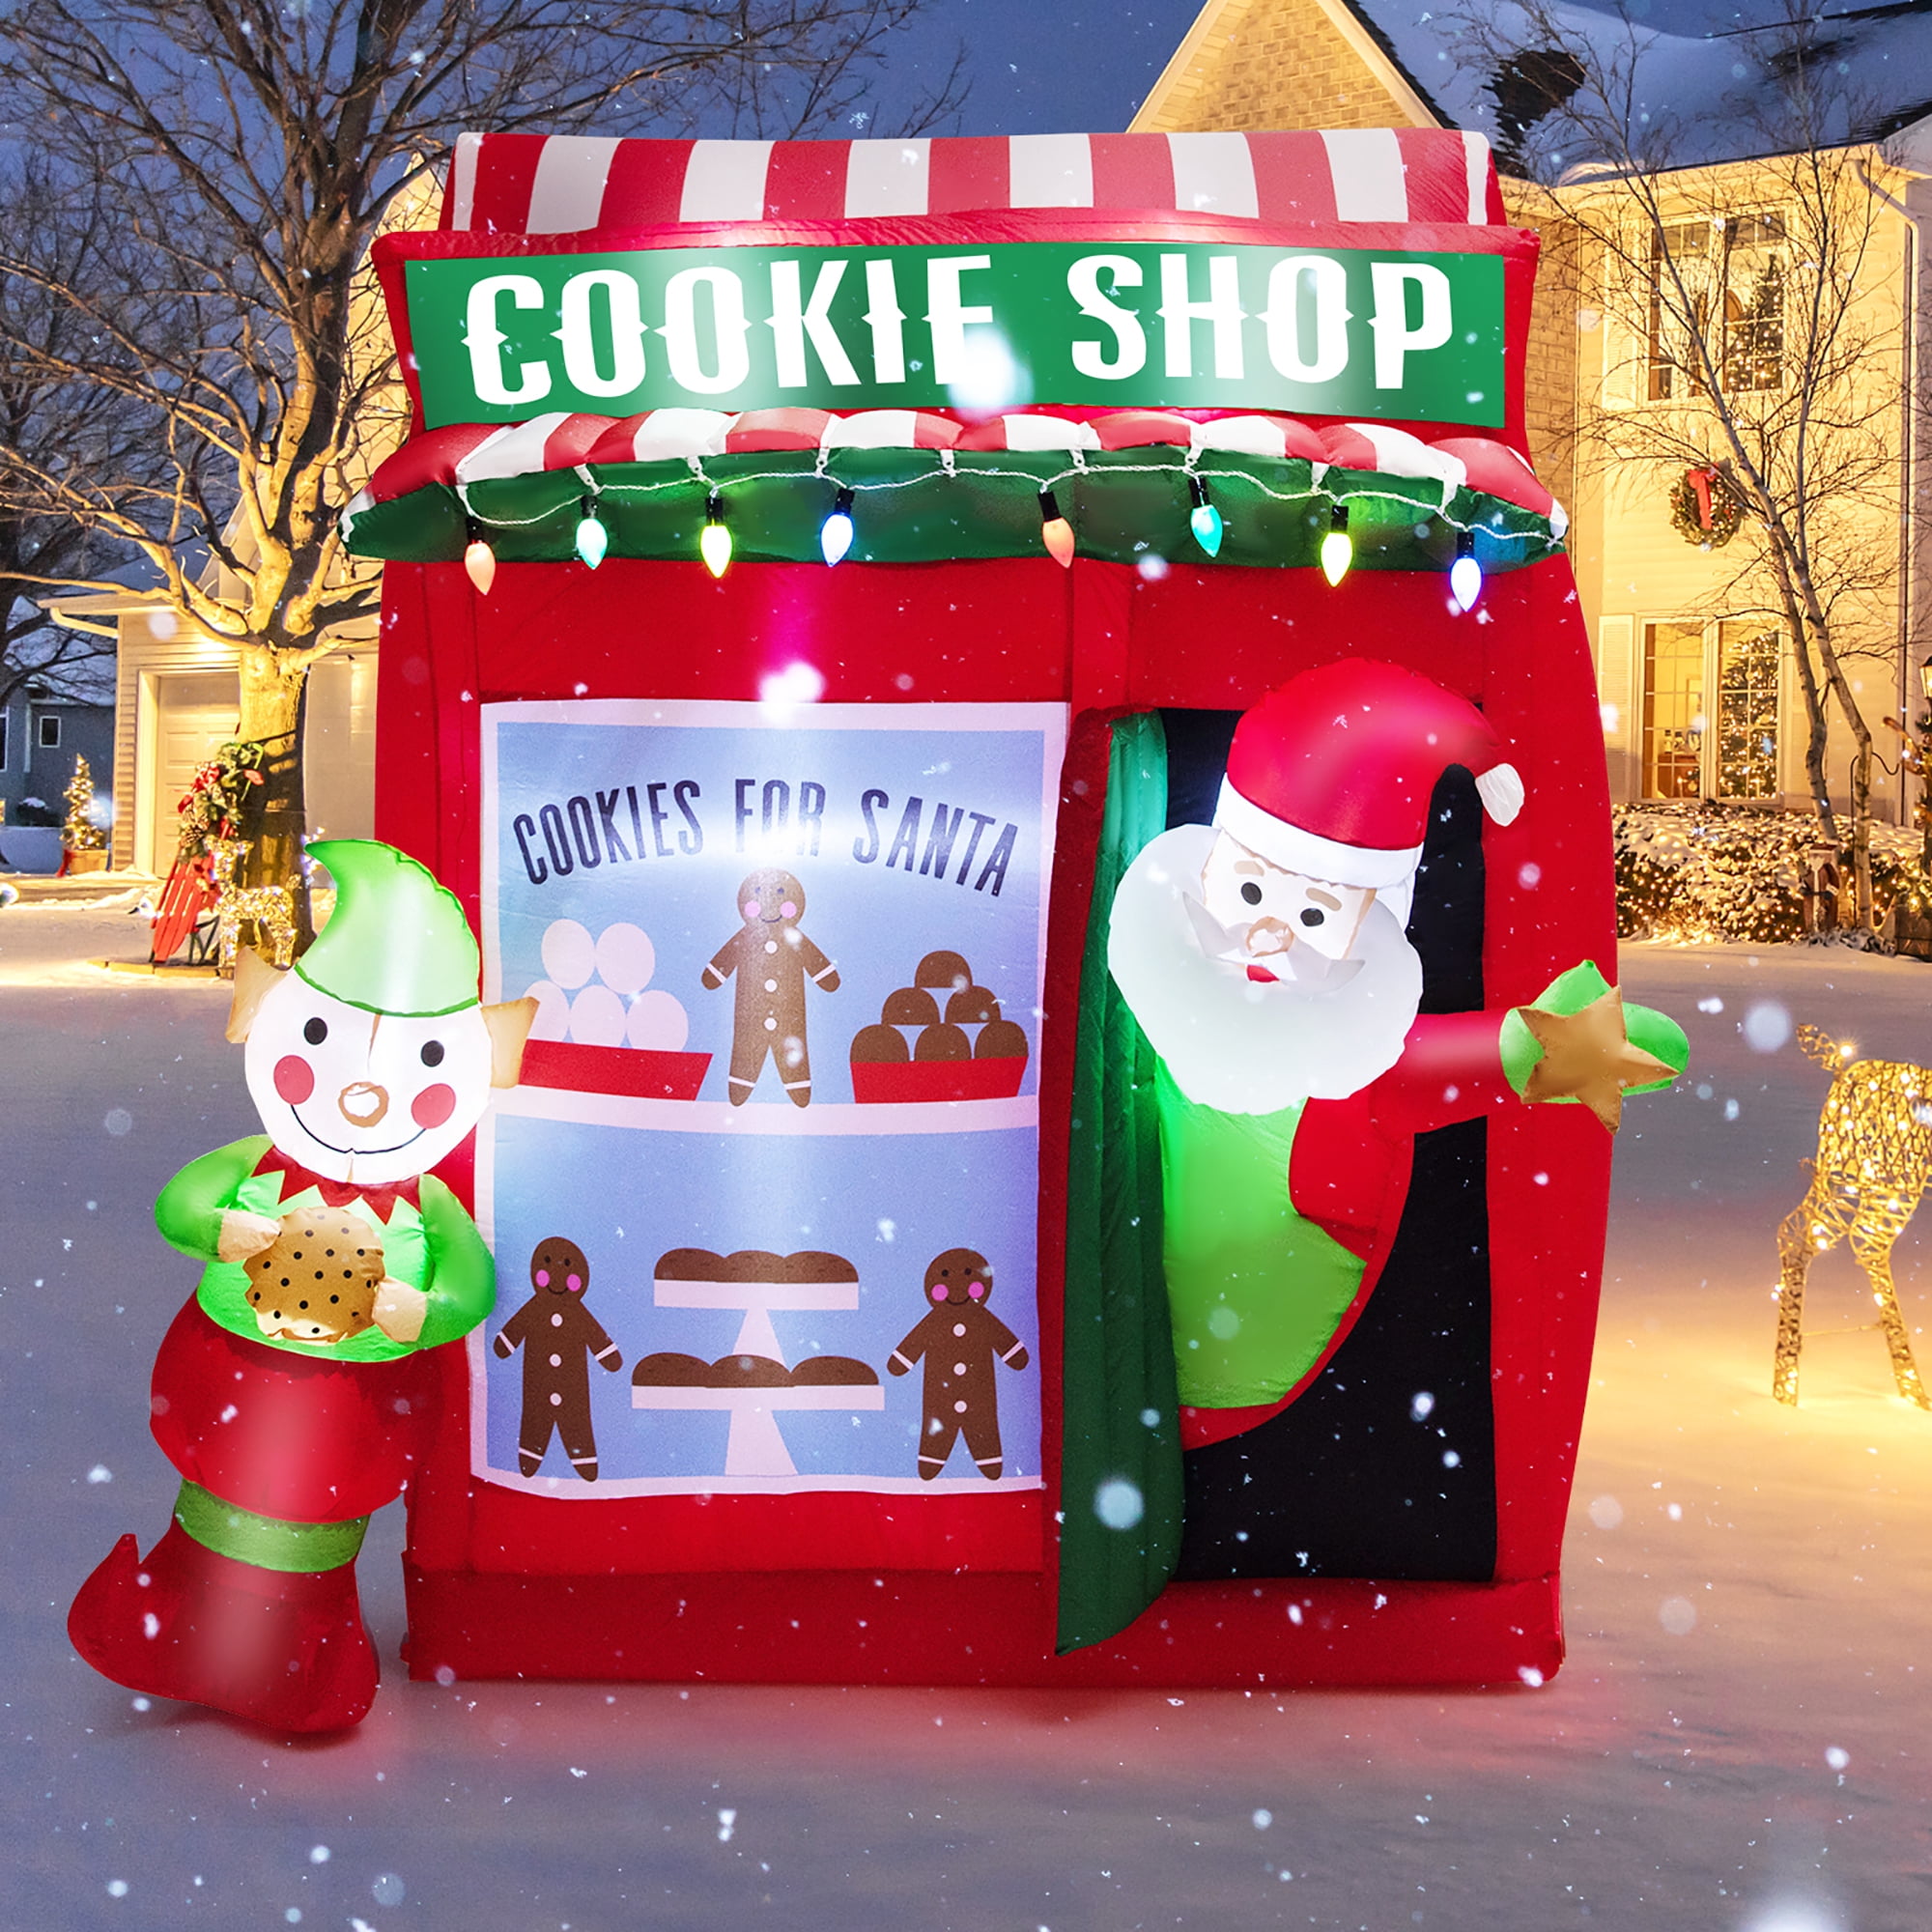 Costway 6.3 FT Inflatable Gingerbread Cookie Shop with Santa ...